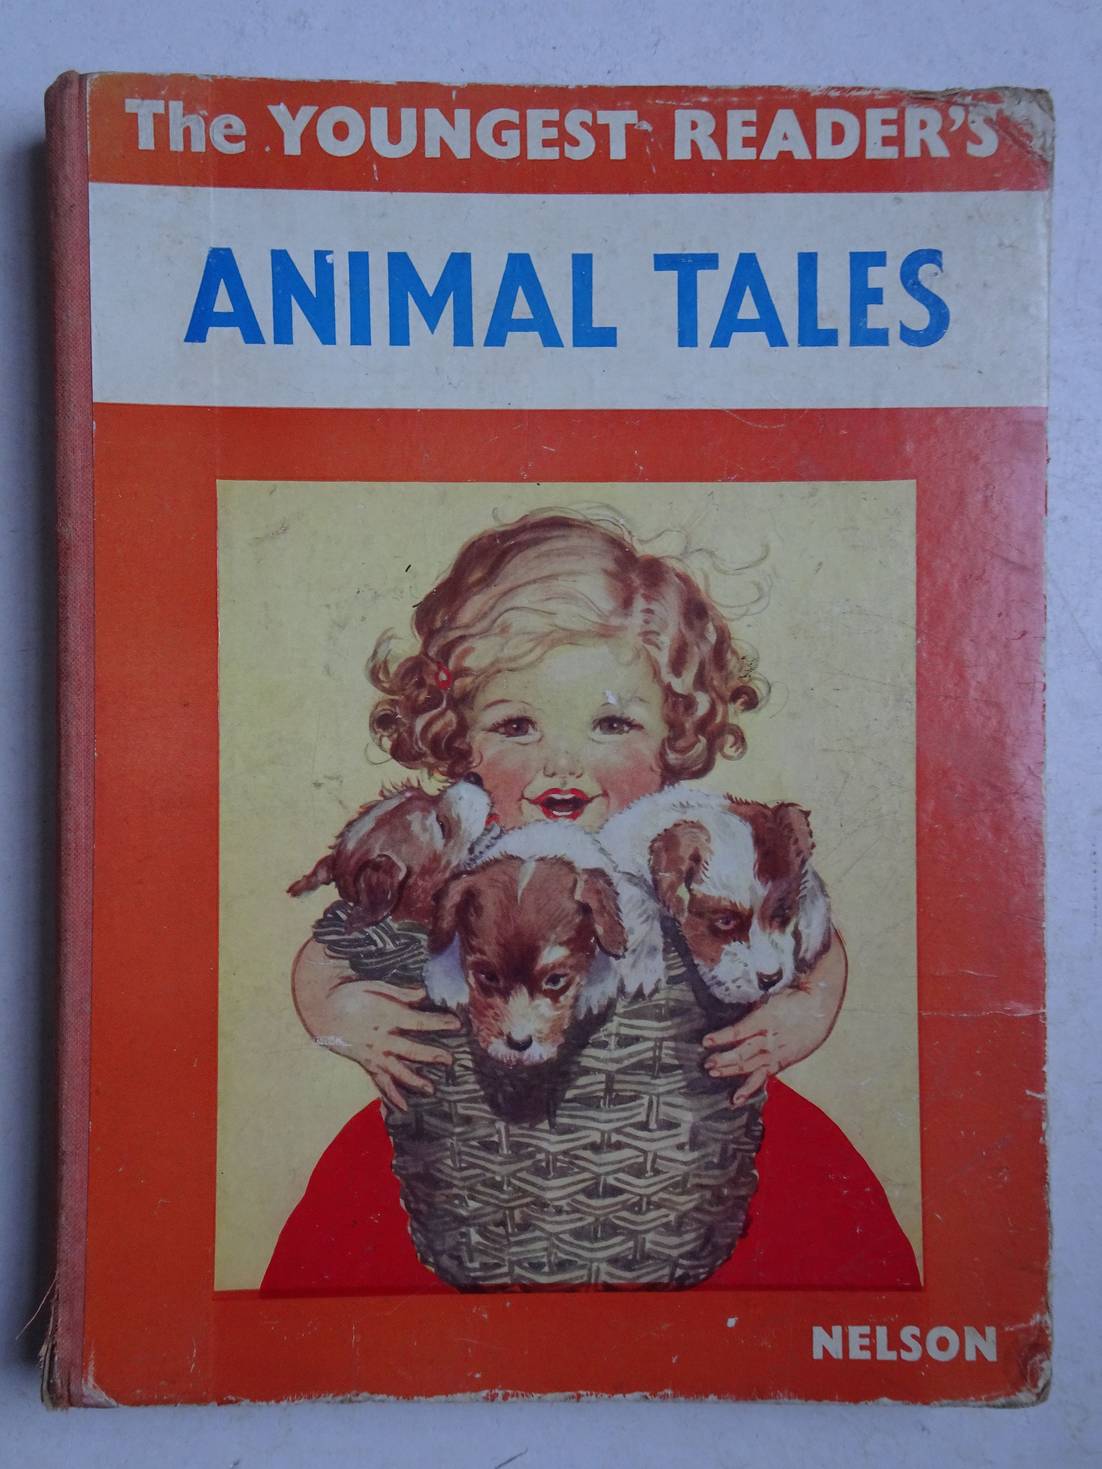 N.n.. - The youngest reader's animal tales.